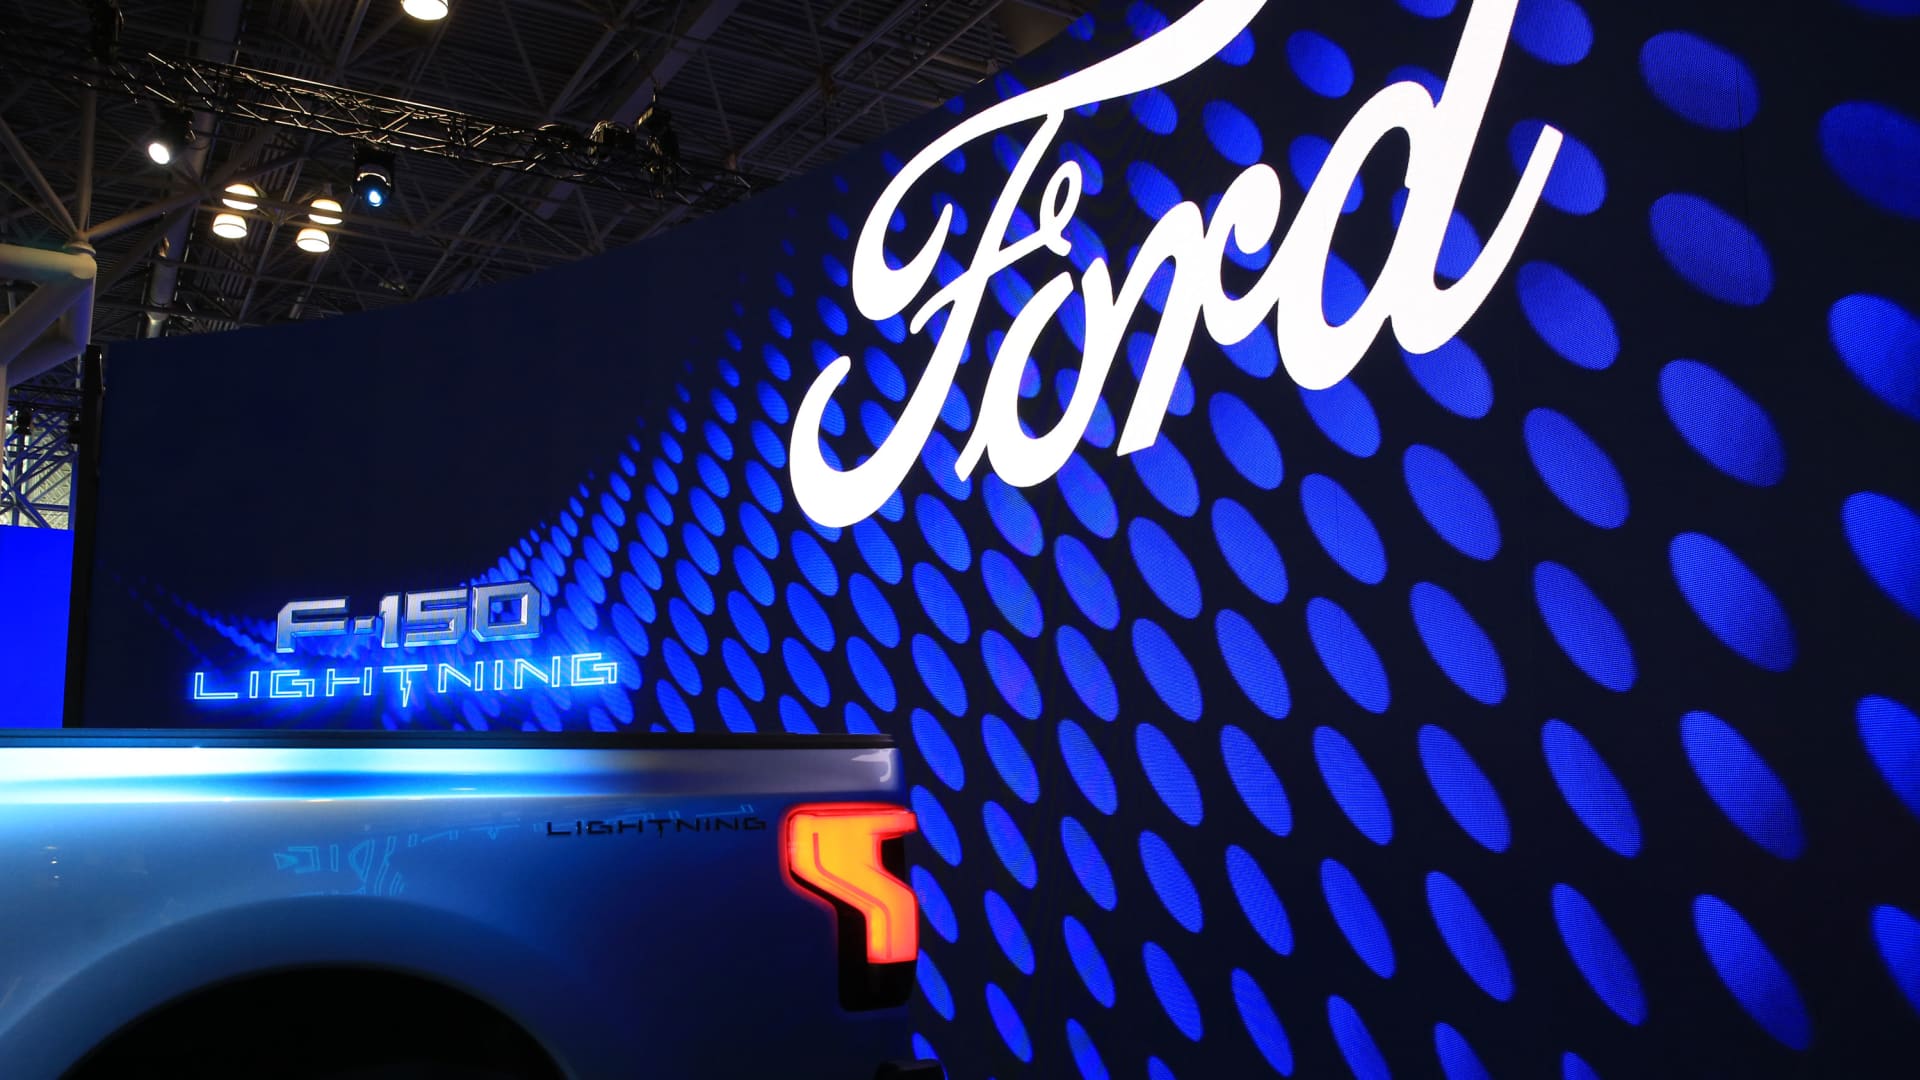 Ford F-150 Lightning at the 2022 New York Auto Show.